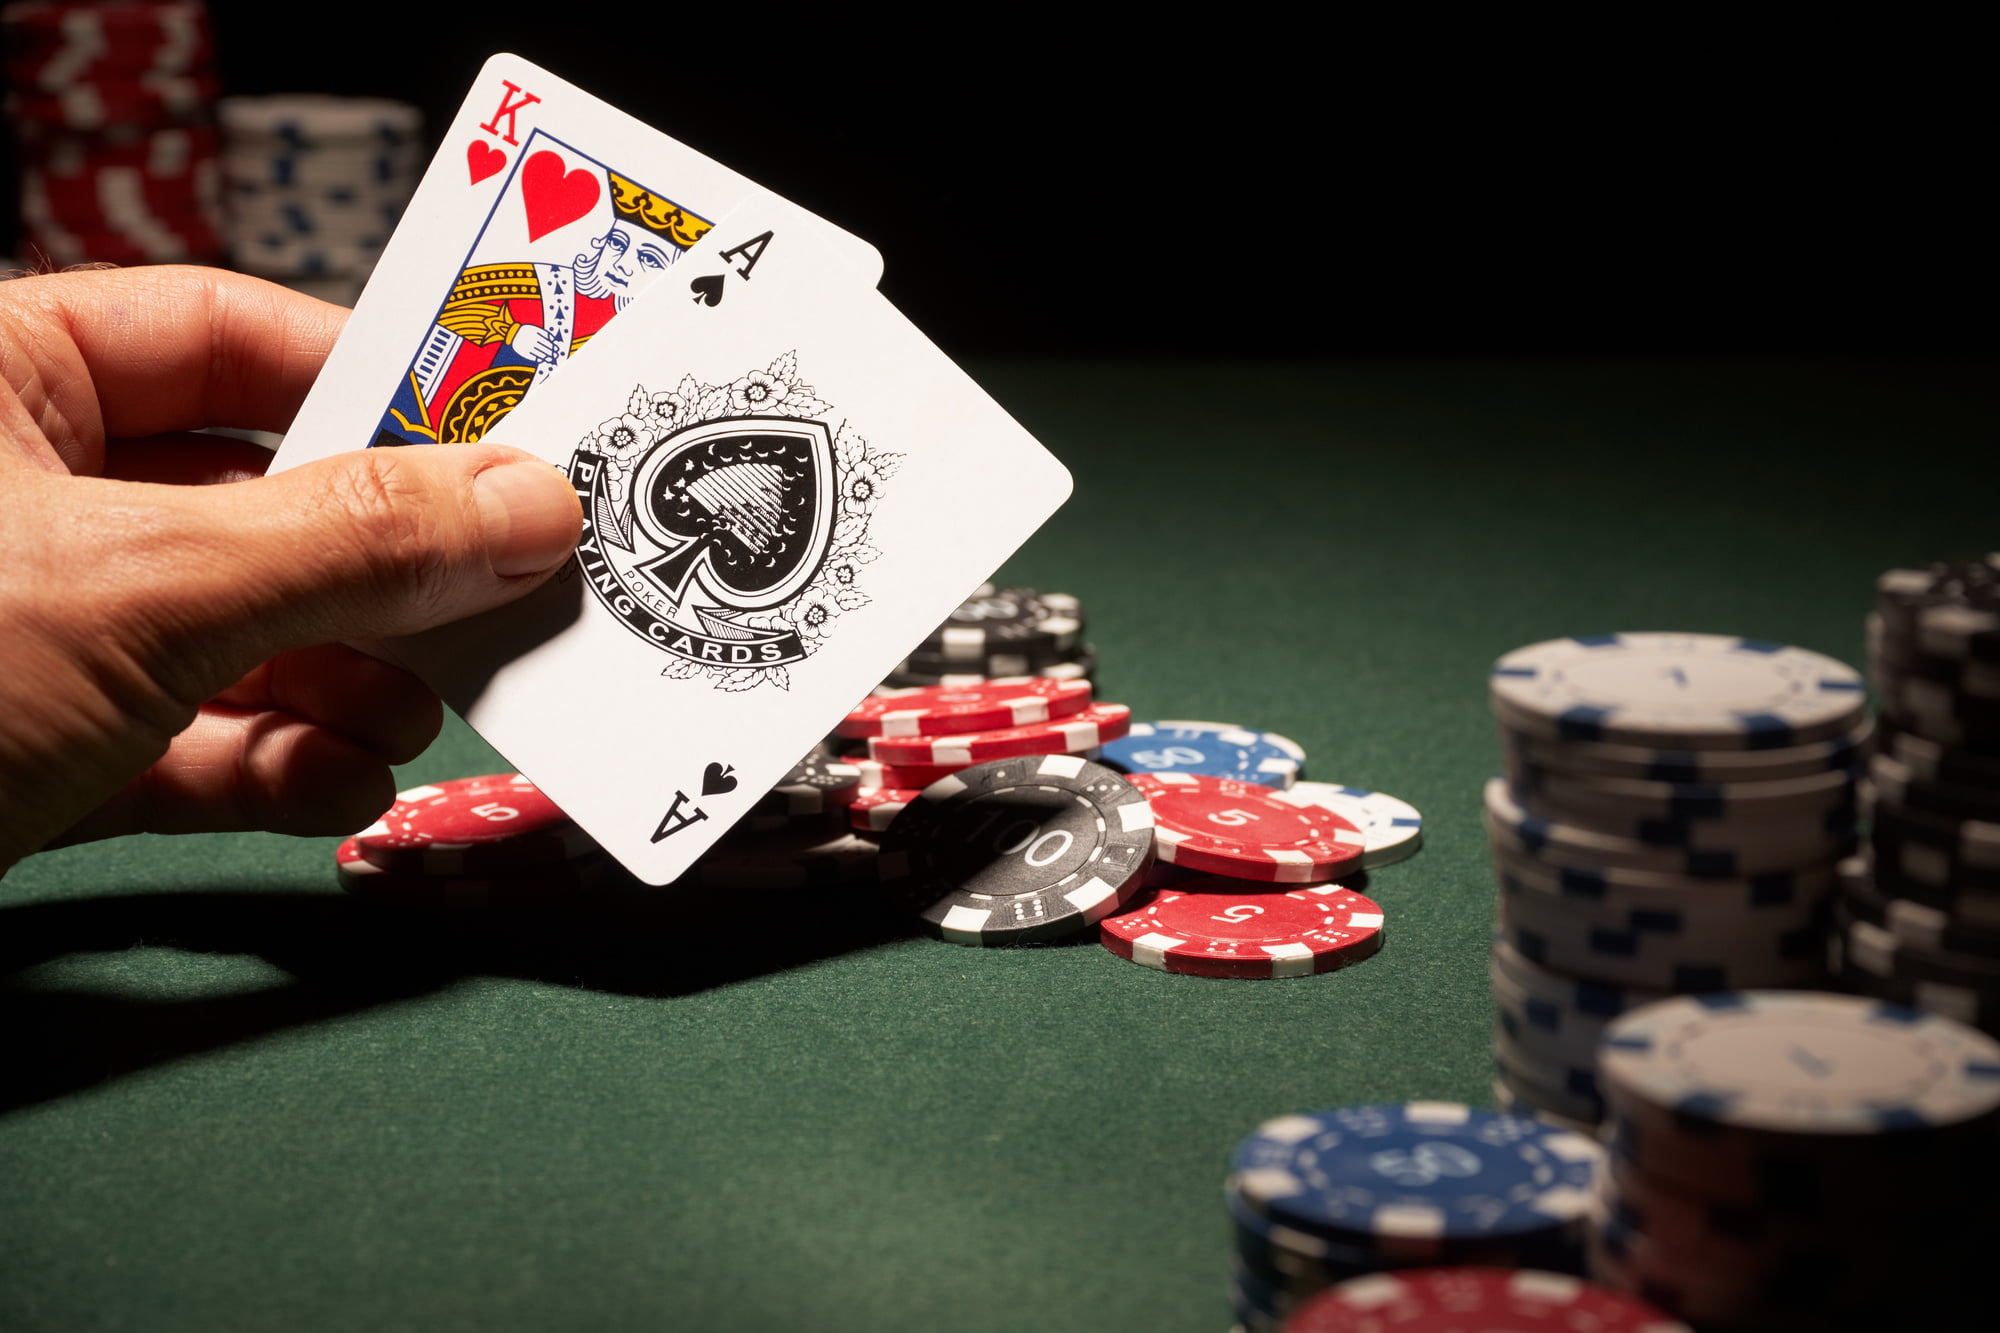 Enjoy some of the most popular casino card games with this article. From blackjack to poker, learn about the history of them with this informative guide.